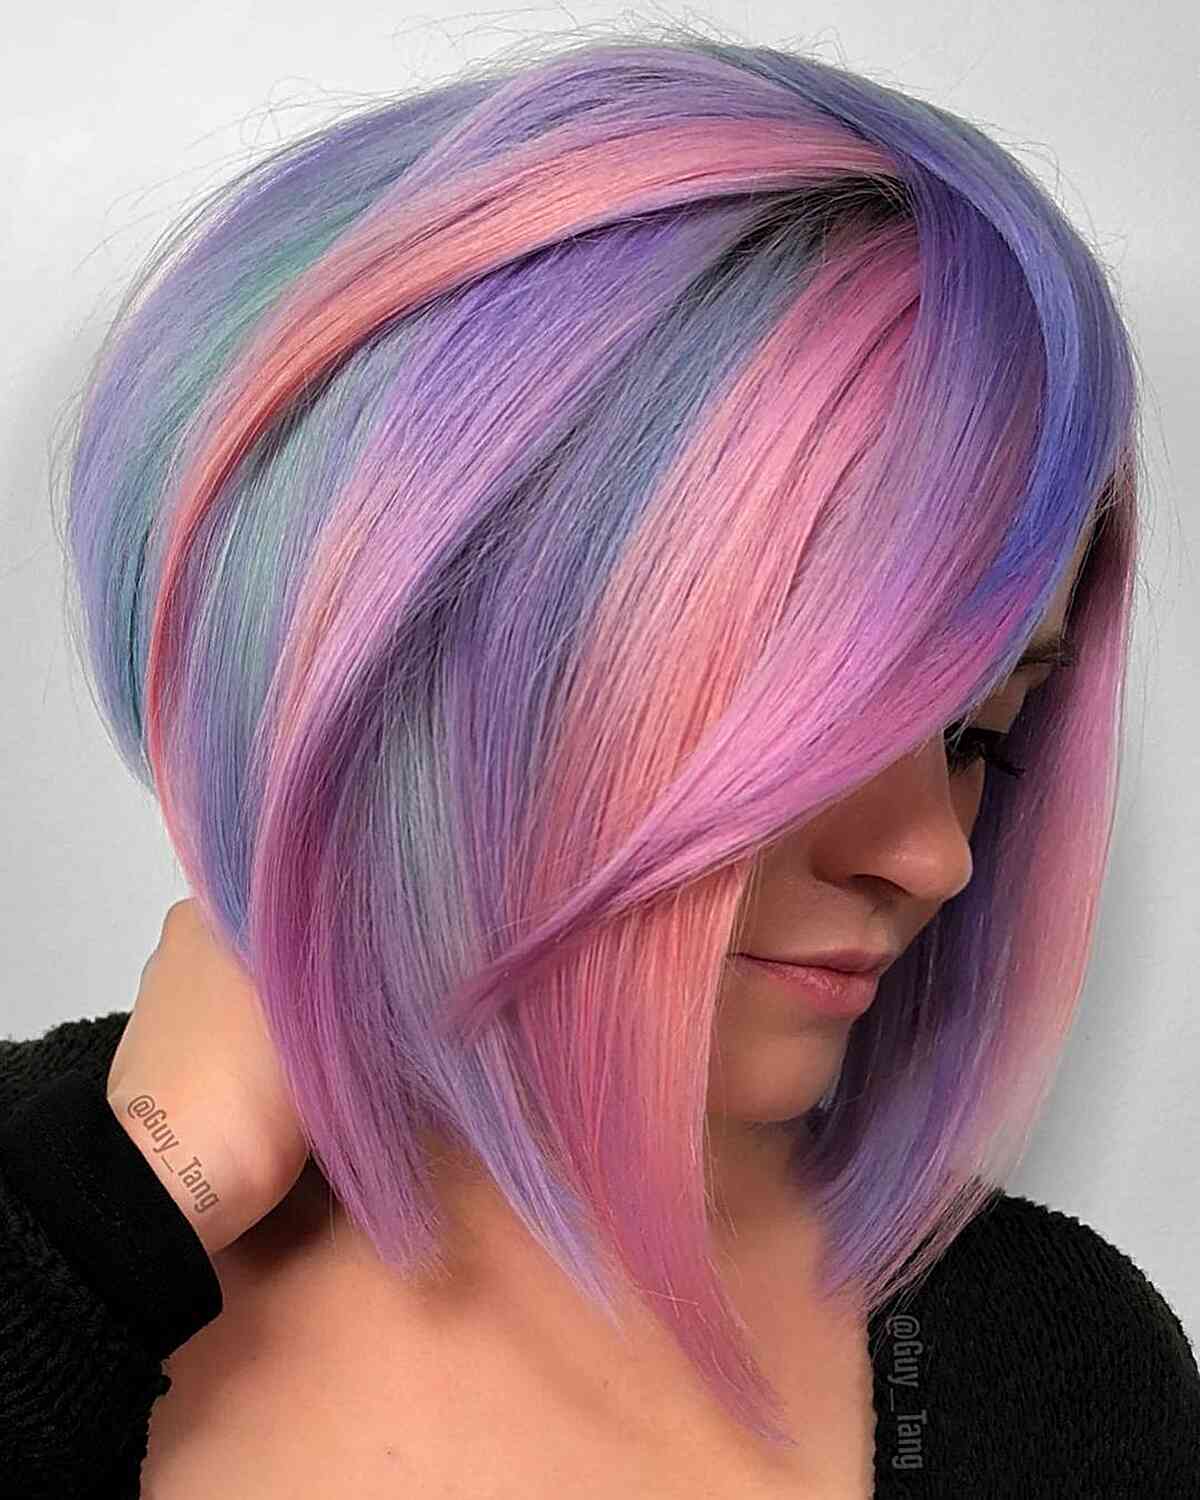 Mint and Coral Rainbow Hair color ideas for ladies with short hair